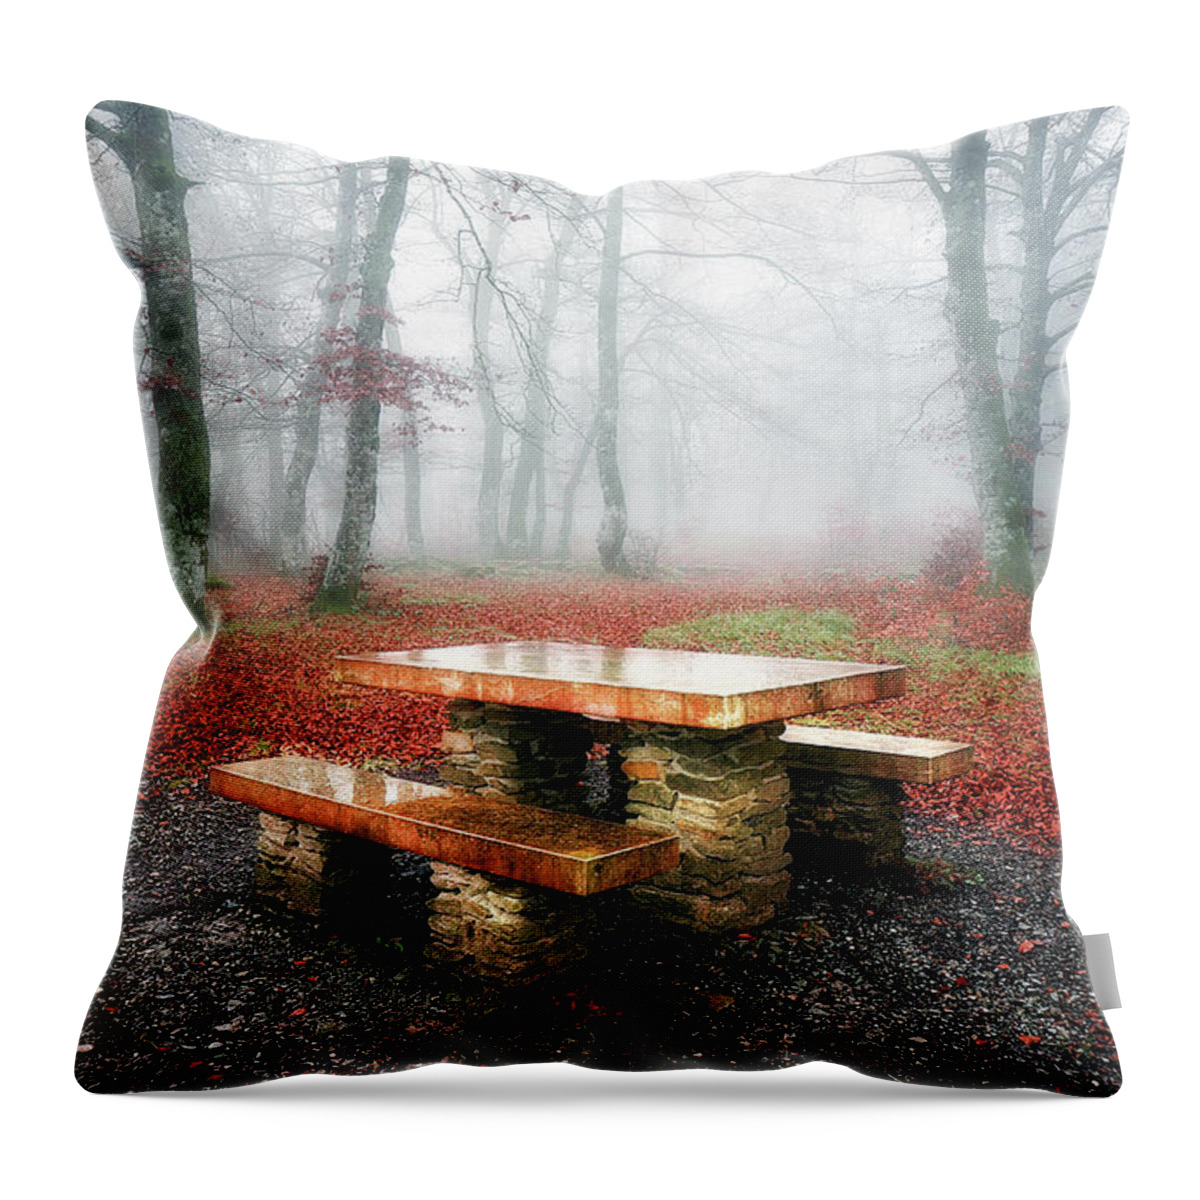 Picnic Throw Pillow featuring the photograph Picnic of fog by Mikel Martinez de Osaba